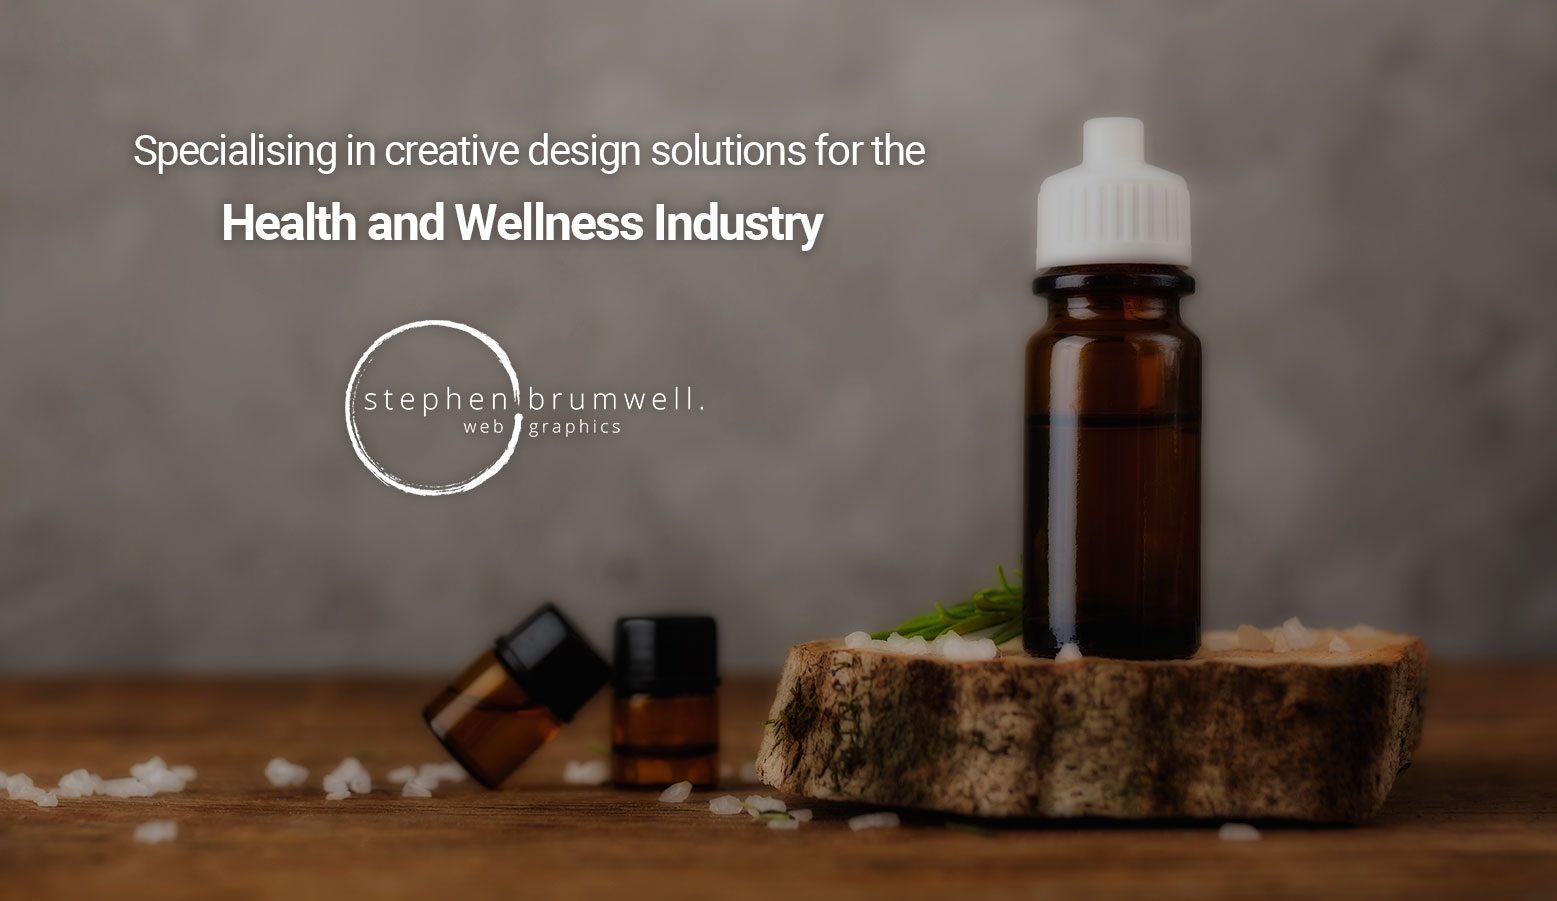 Creative design solutions for the health and wellness industry